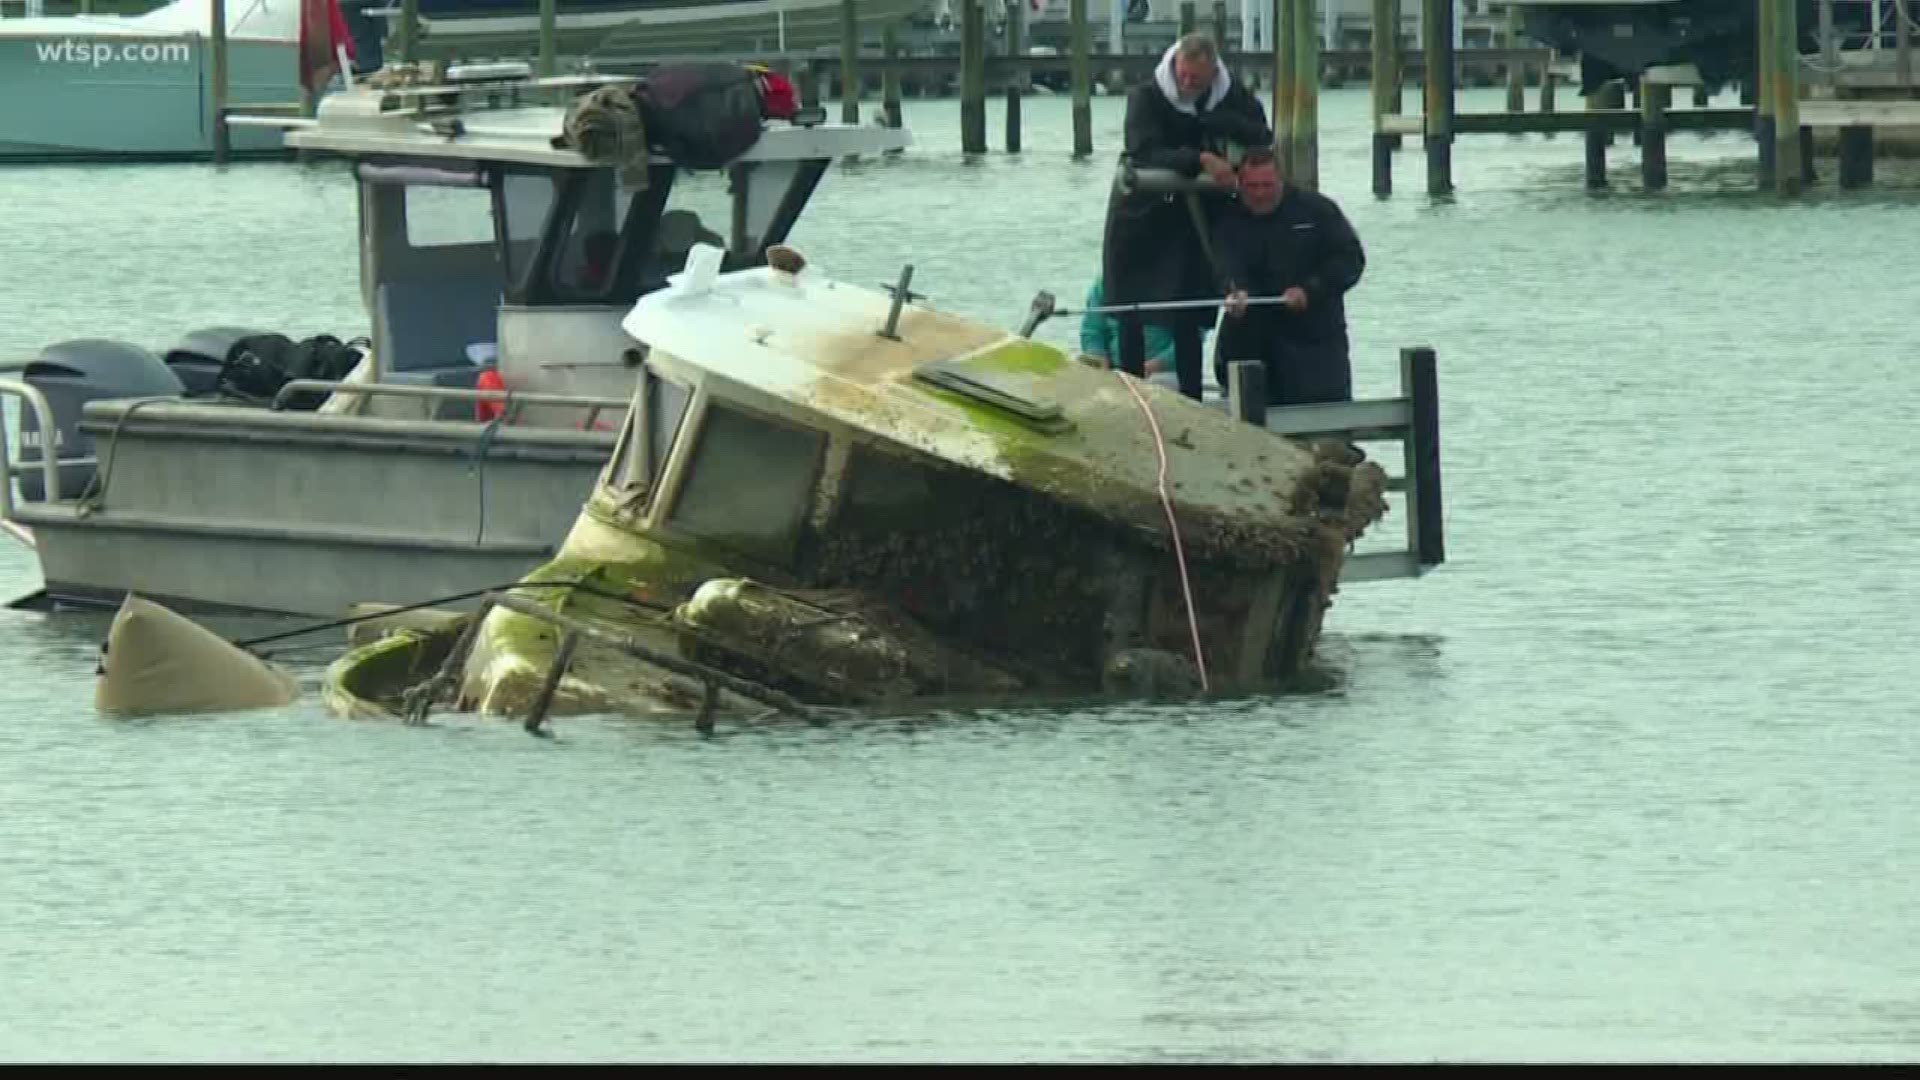 FWC tells us there are 16 other vessels being investigated in the so-called “Boat Graveyard.”